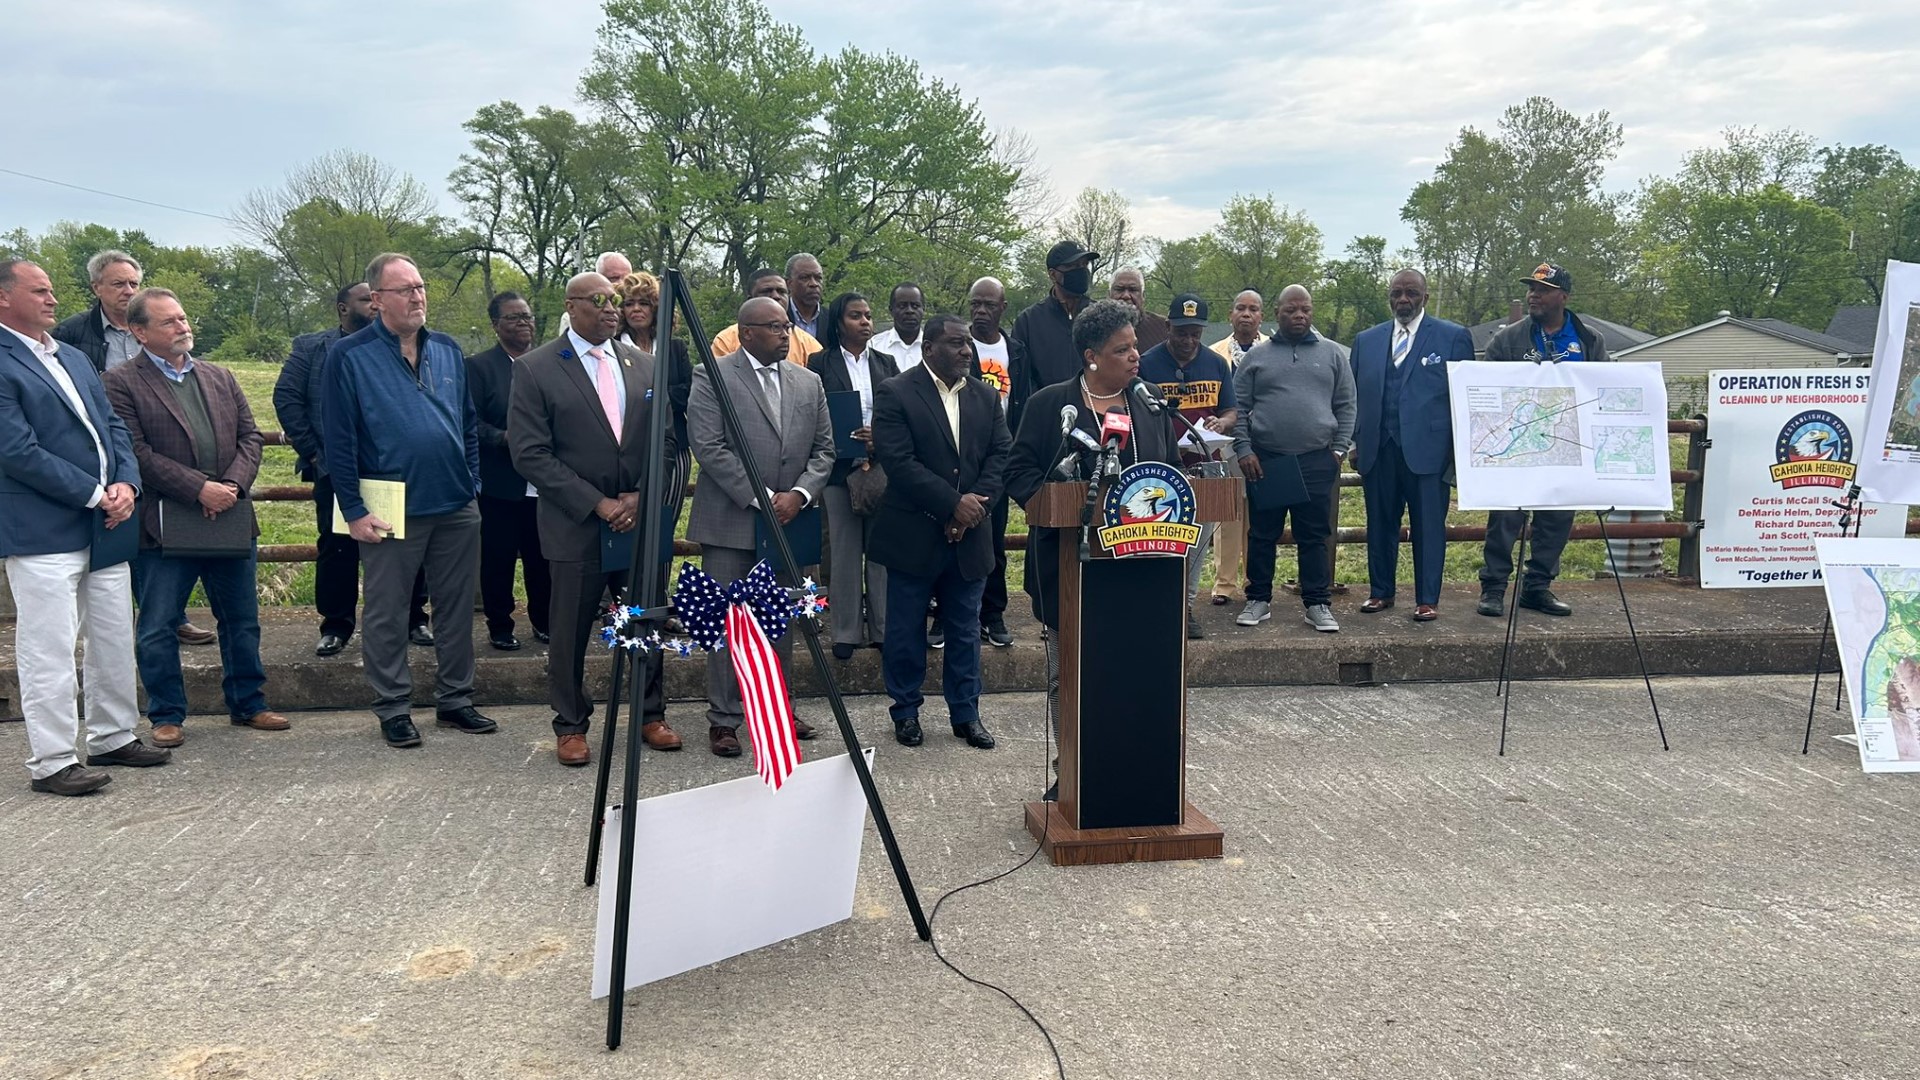 Metro East leaders call for federal assistance to fix flood problems. Residents have expressed interest in federal buyouts due to the flooding in the area.